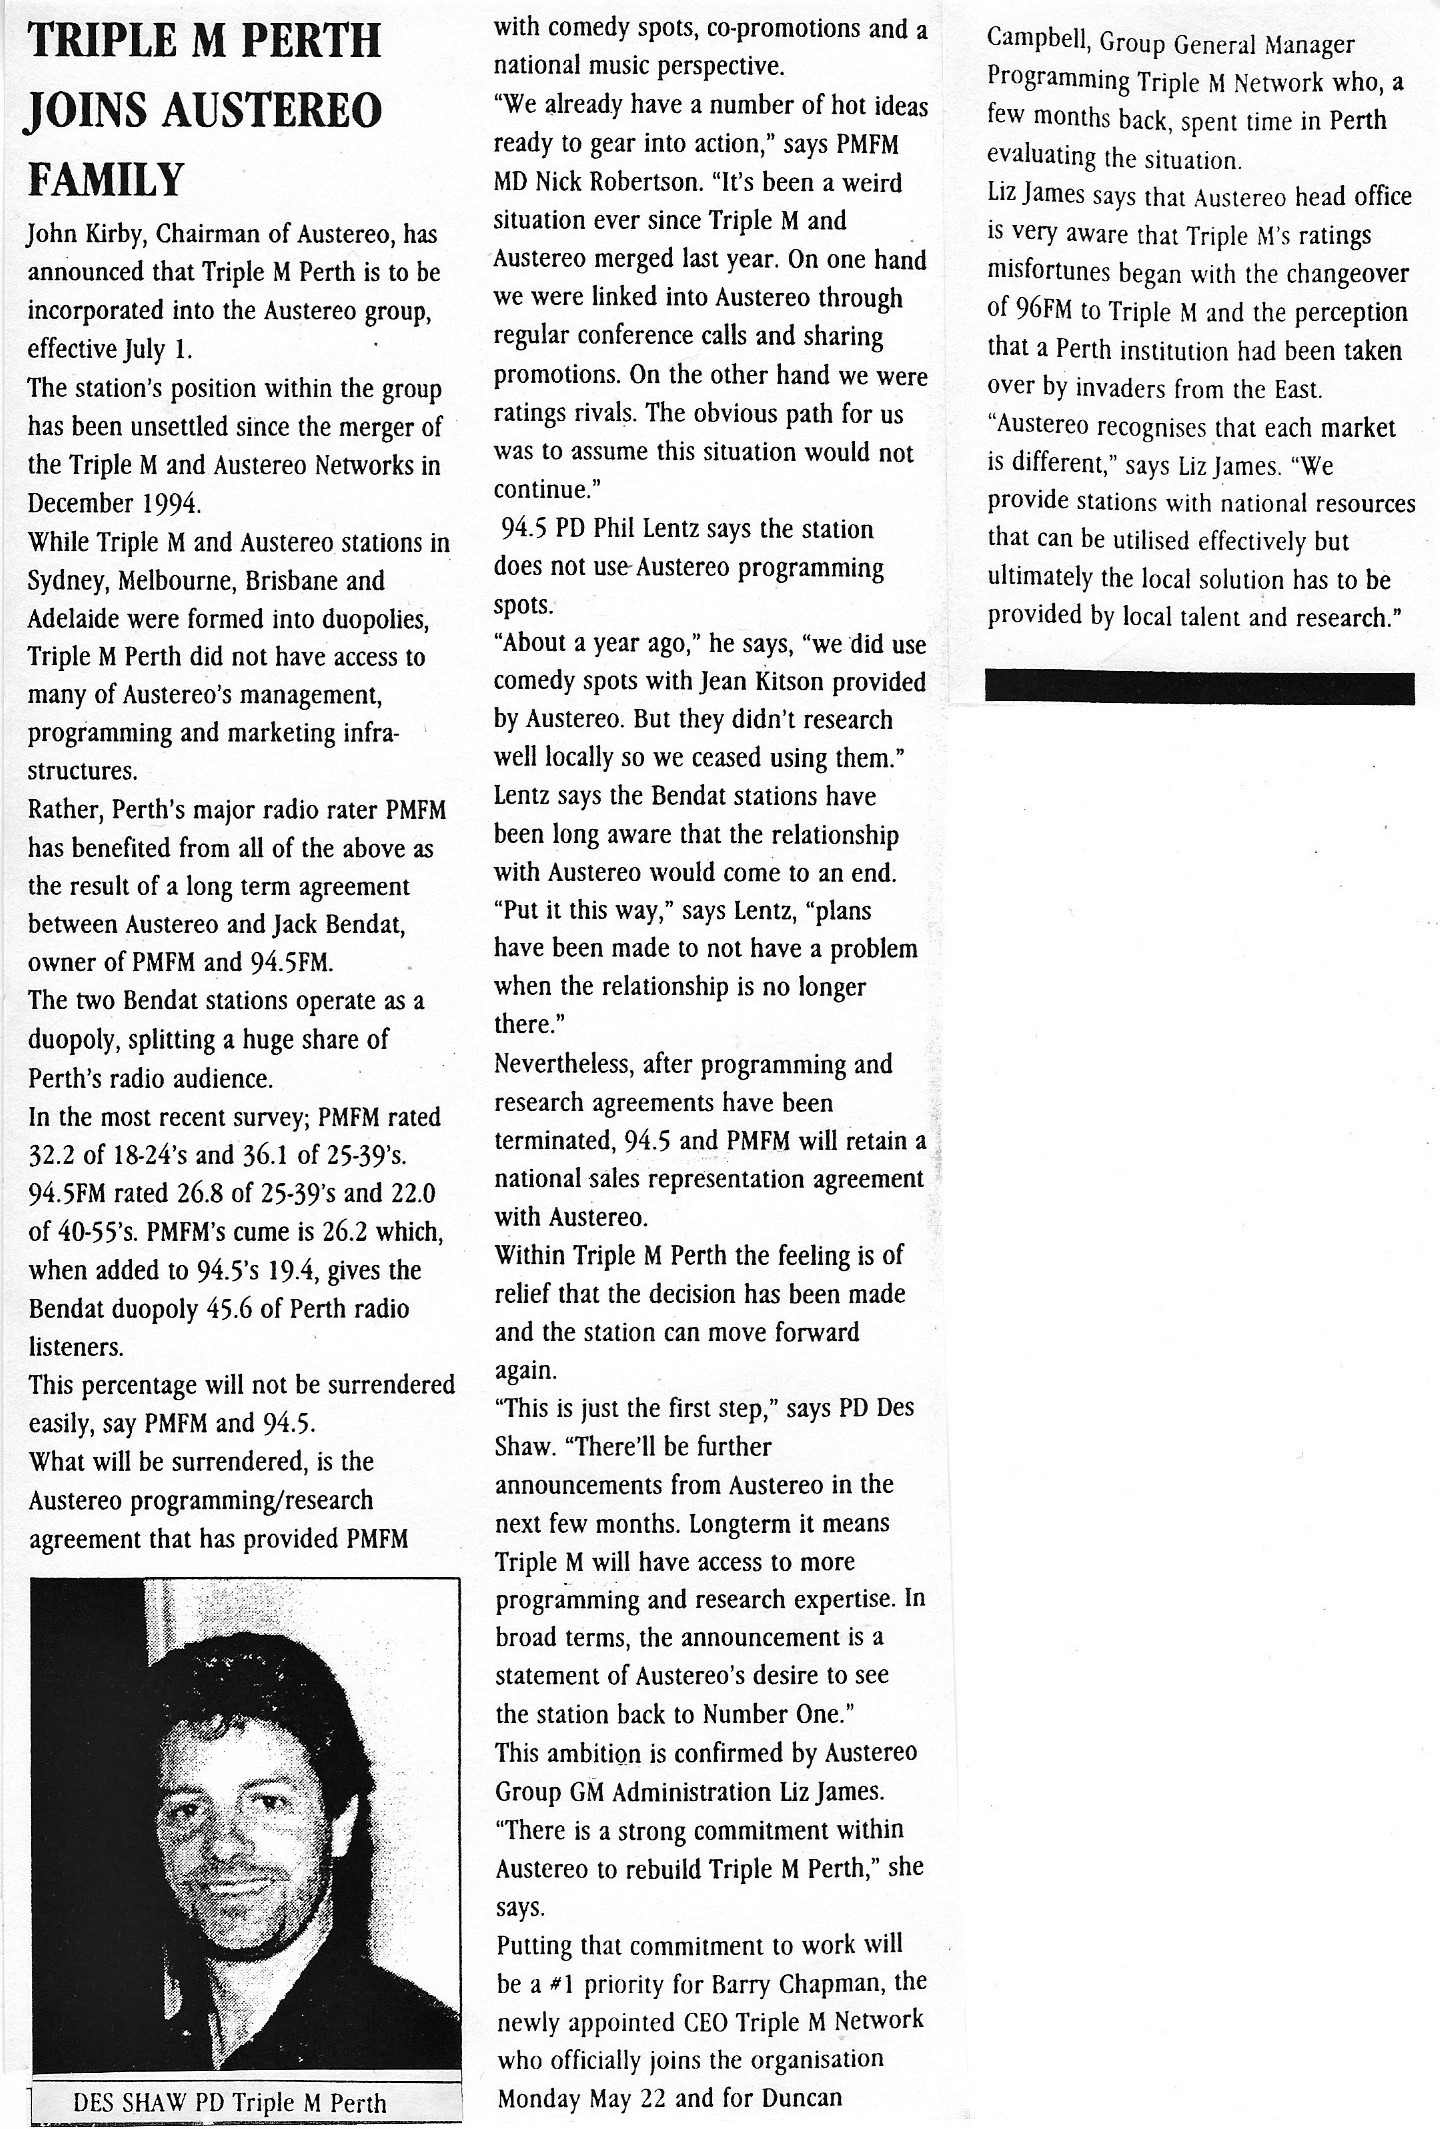 1995.05.20 - Triple M Perth joins Austereo family - Campaign Brief.jpeg